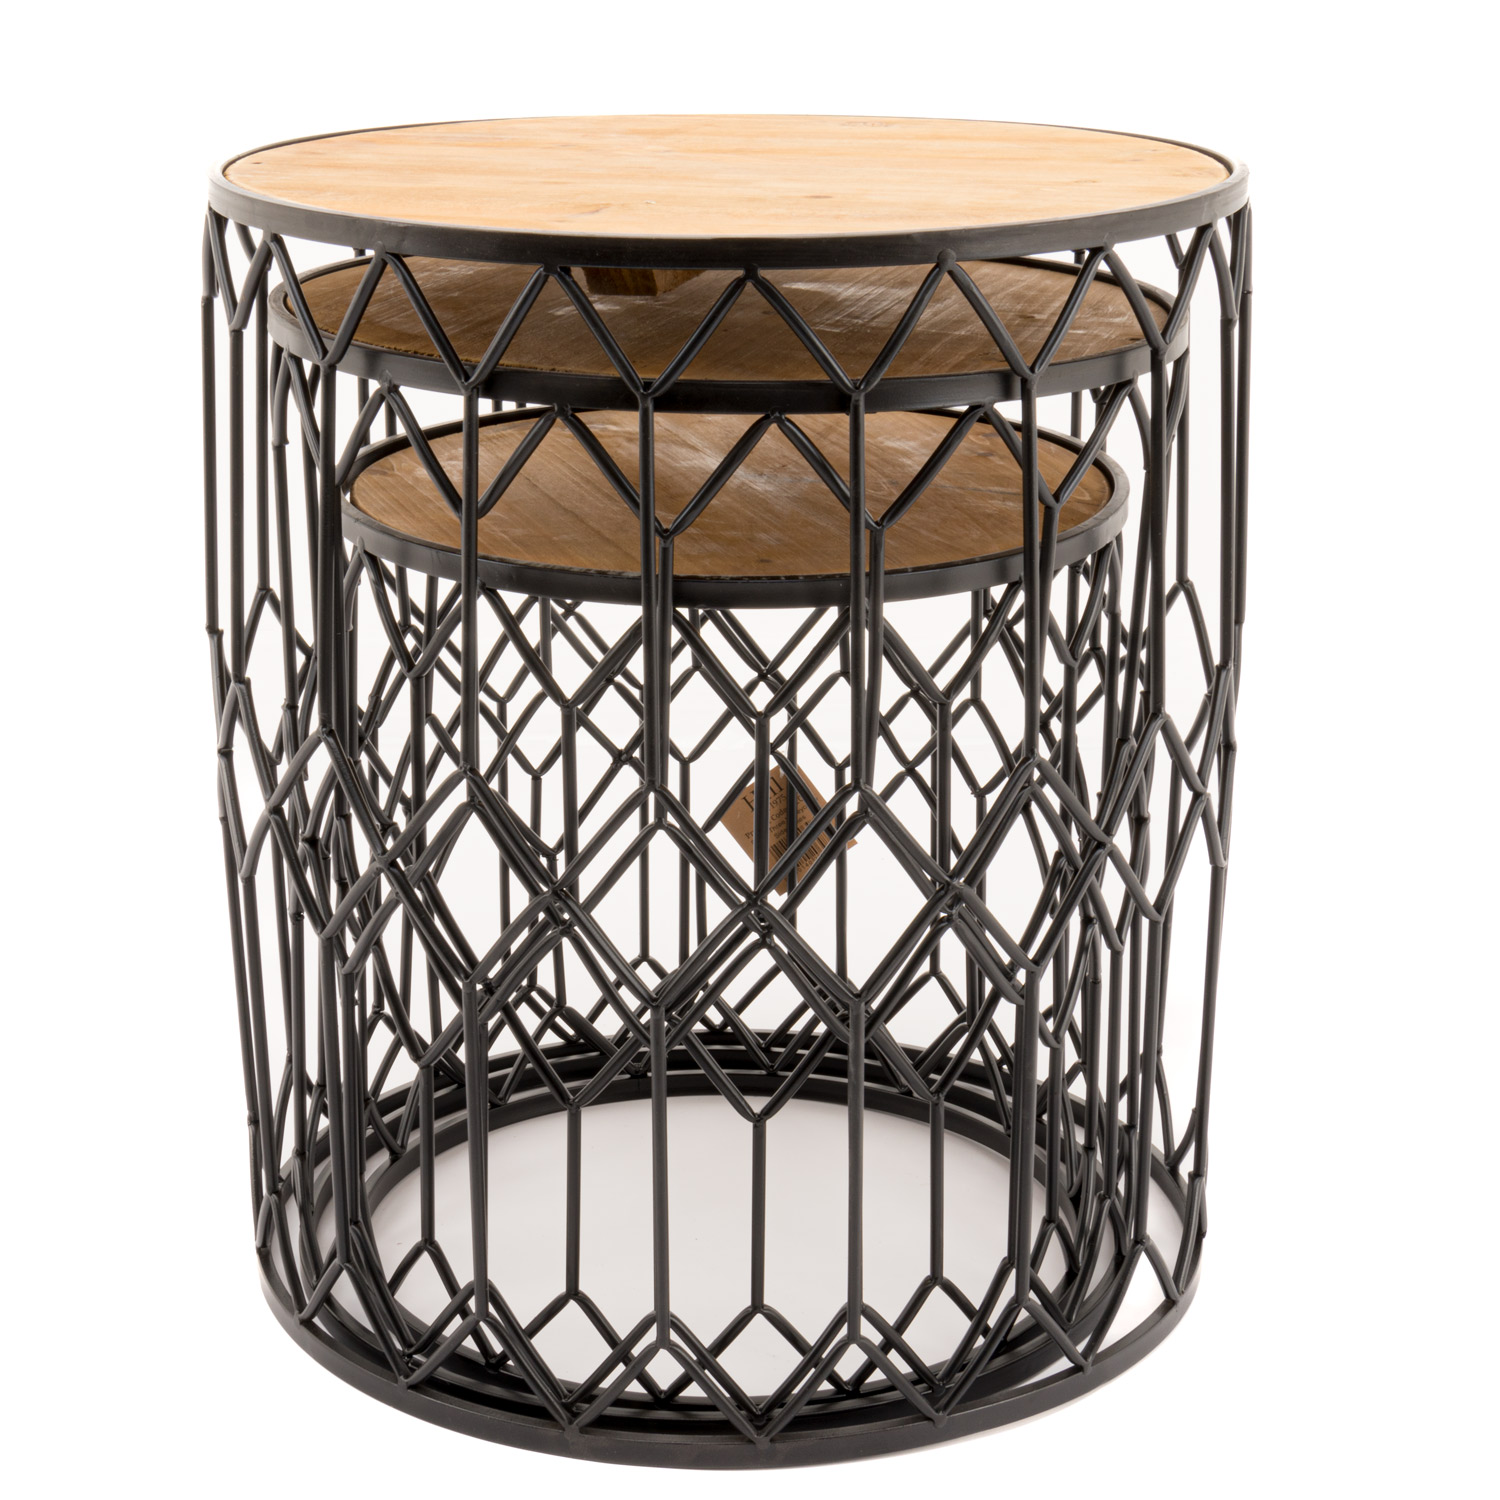 Set Of Three Honeycomb Side Tables - Image 6